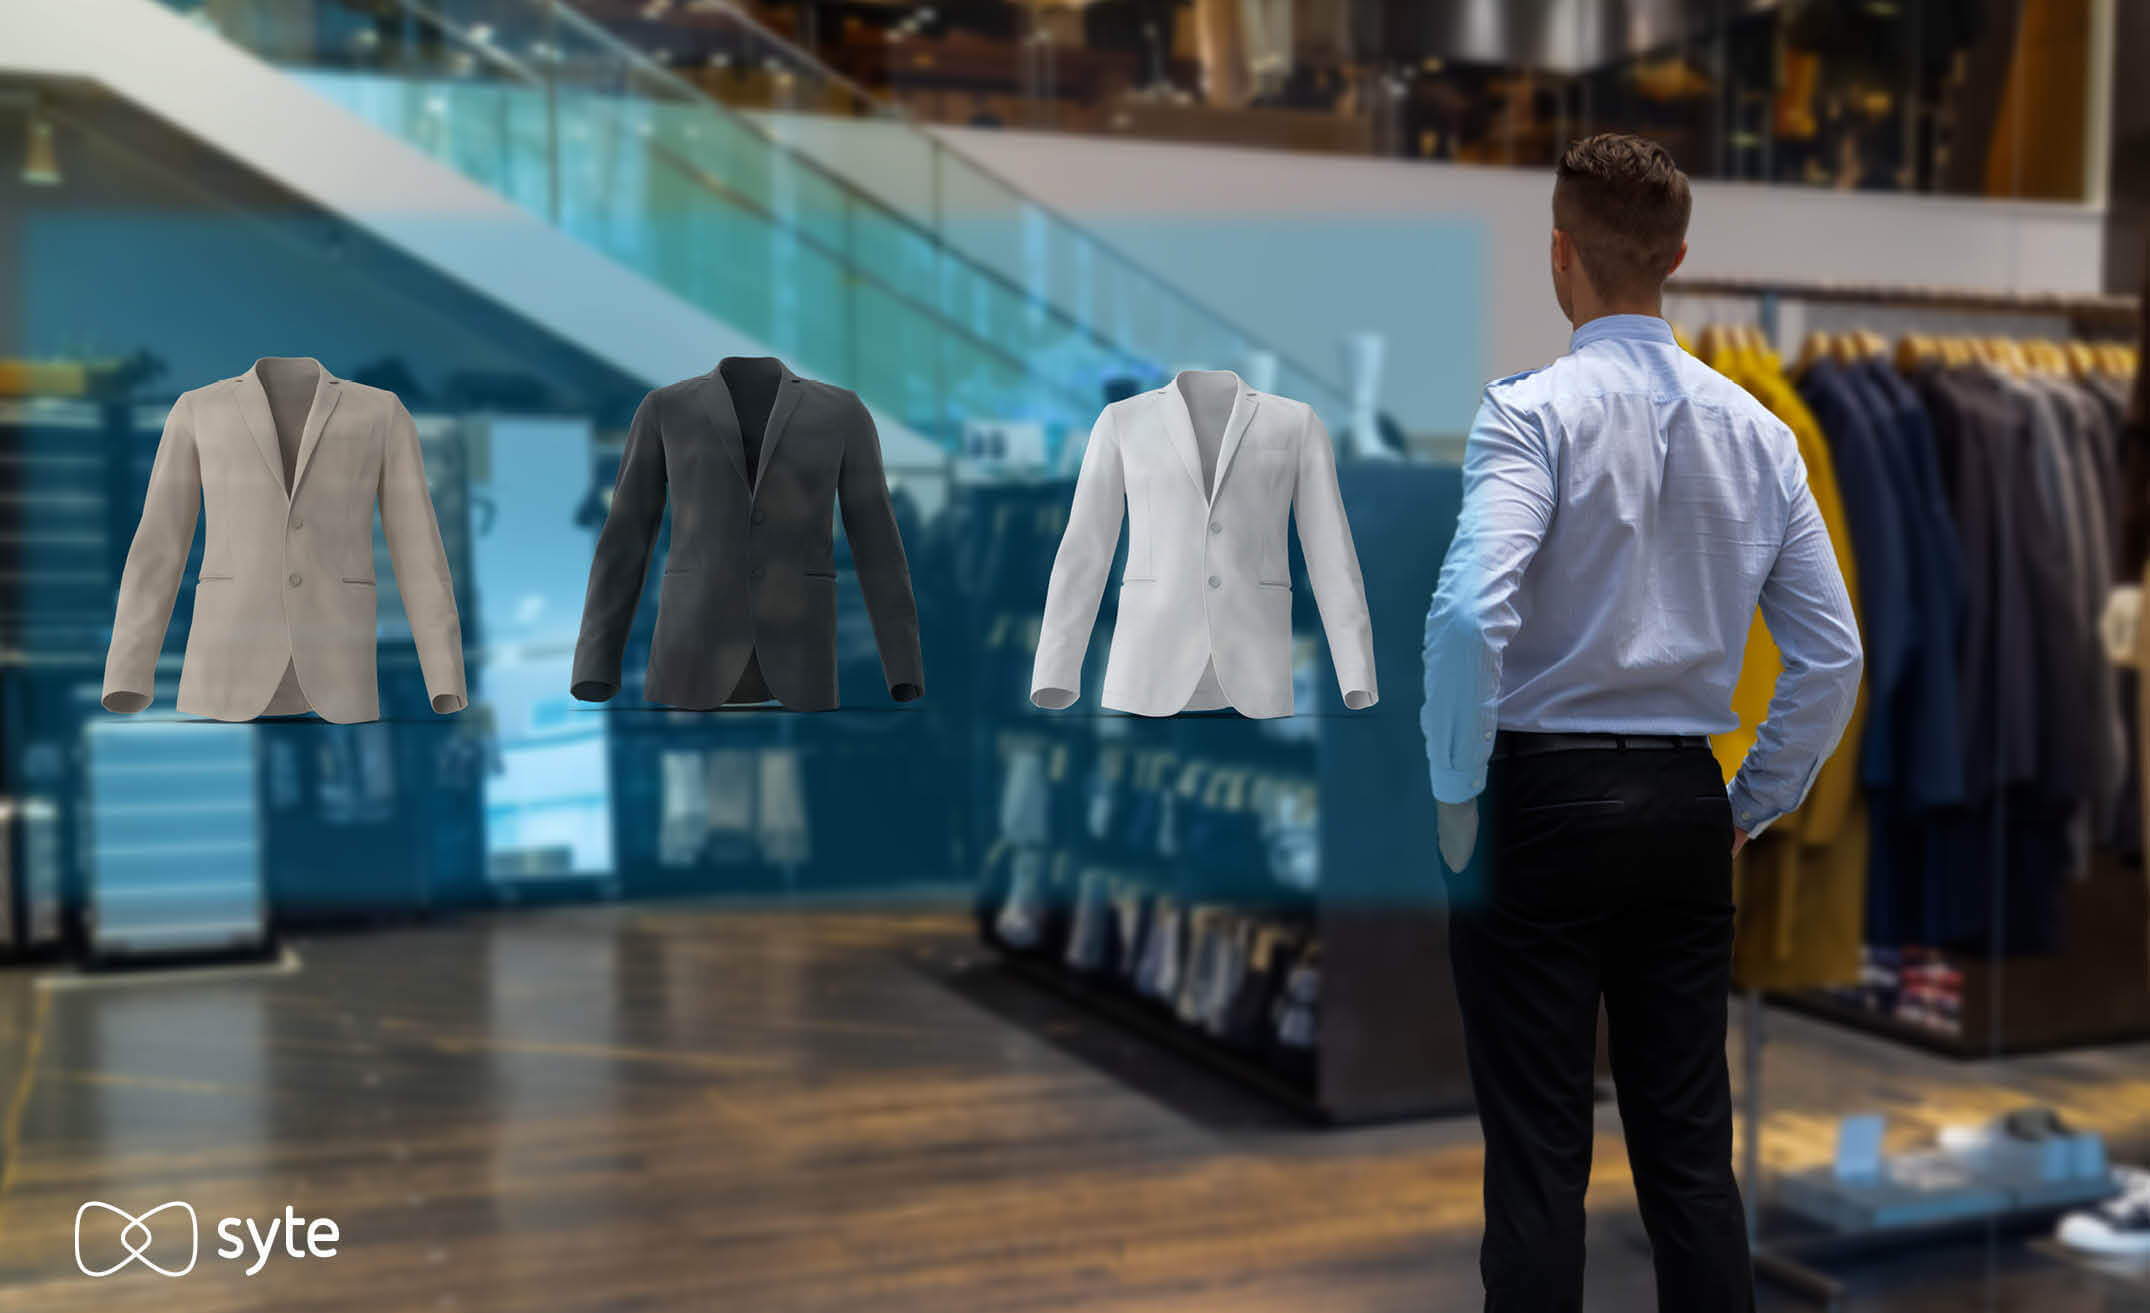 Five brands pioneering the immersive retail experience